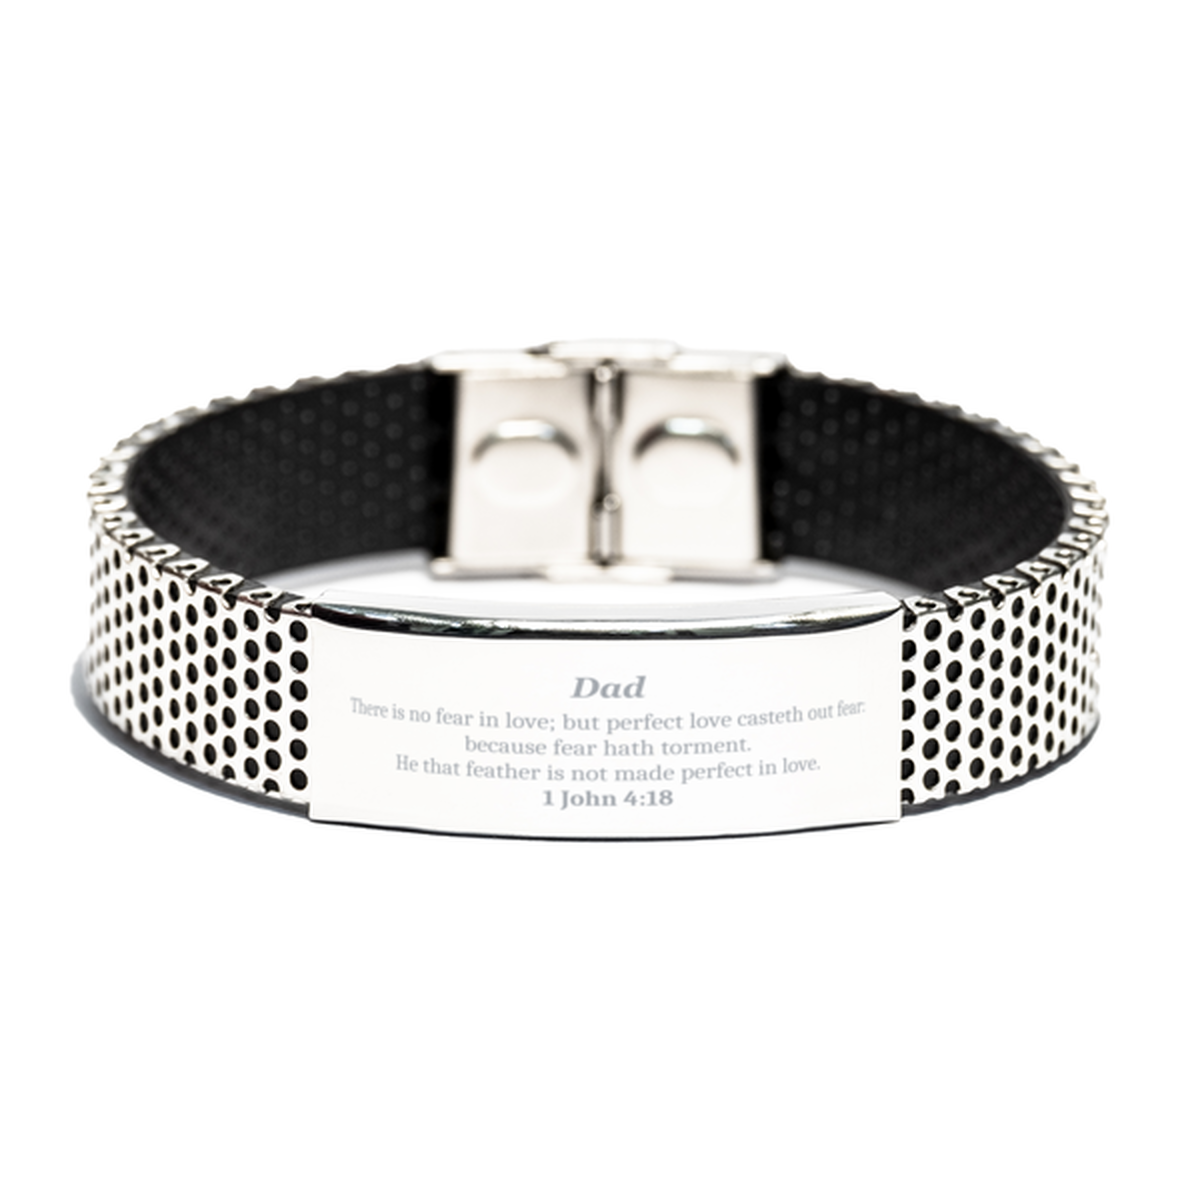 Unique Stainless Steel Bracelet for Dad | Inspirational Engraved Quote Perfect for Christmas, Birthday, and Fathers Day Gifts